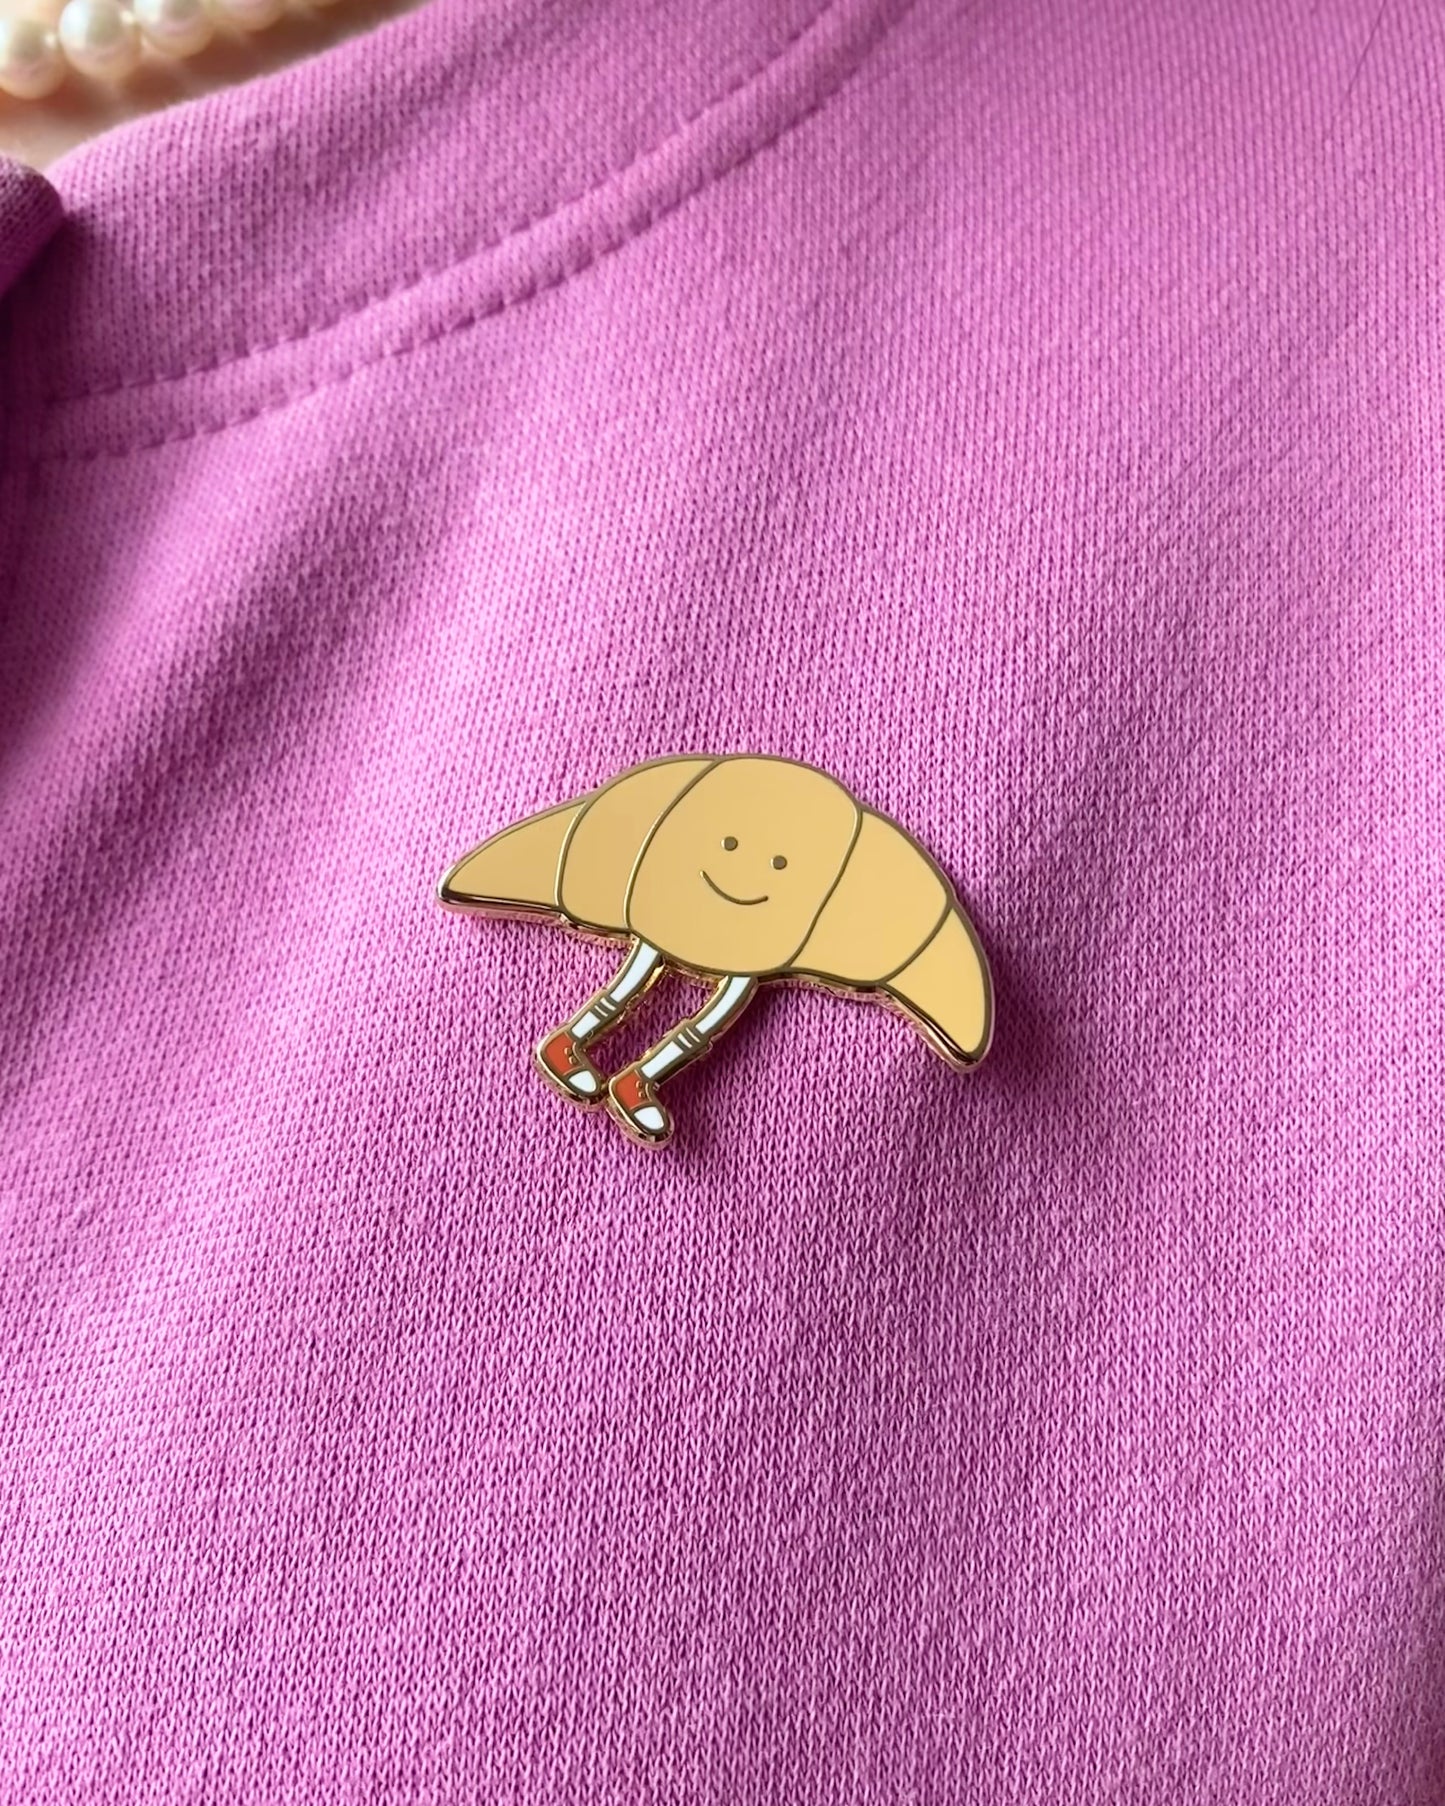 A cute croissant enamel pin on a pink sweater